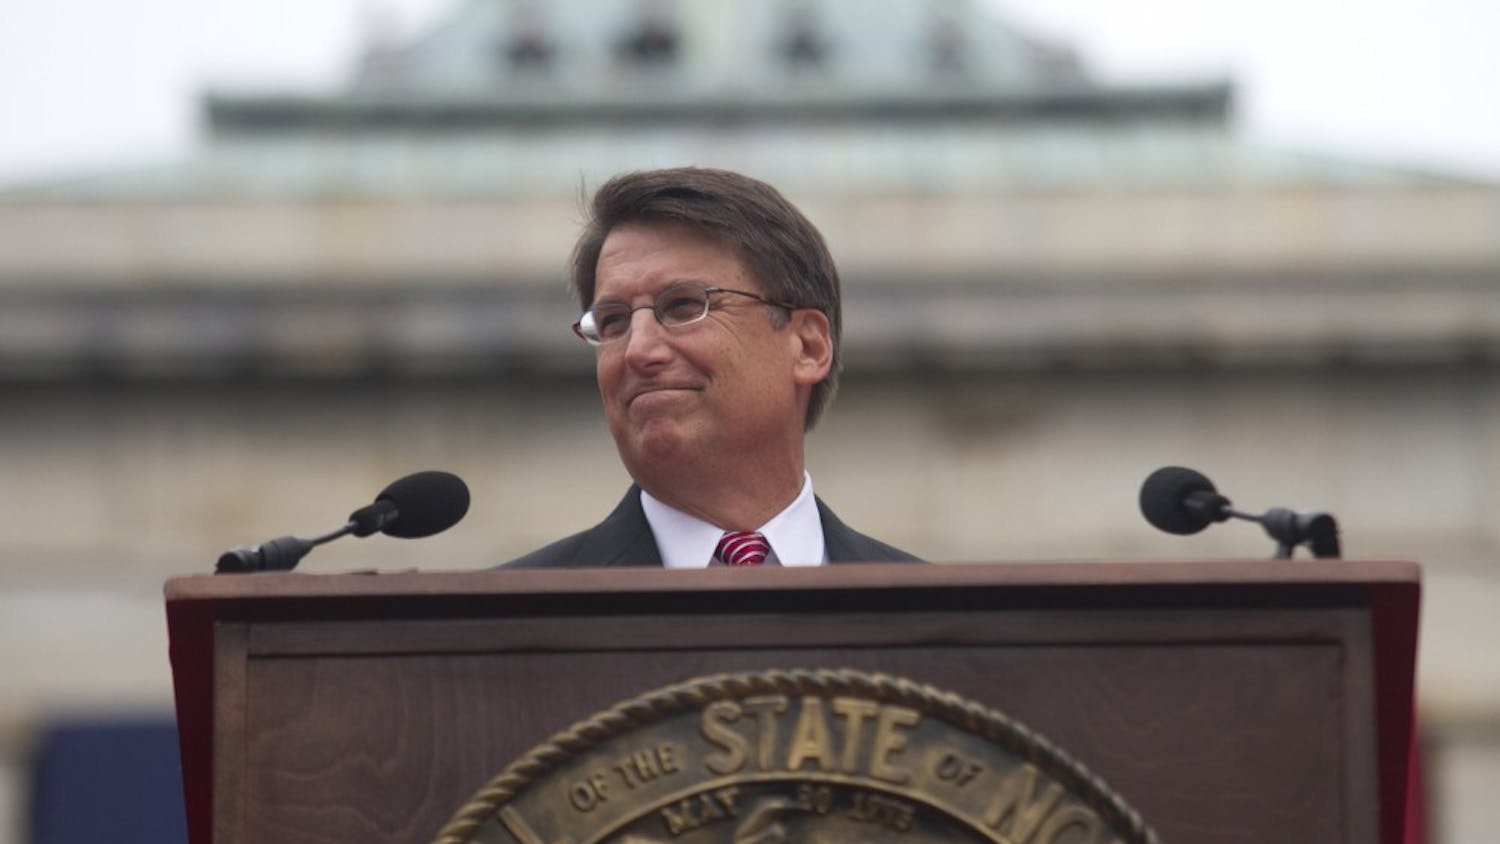 "We can do better, we must do better, we will do better,"said McCrory on the state's education policy.